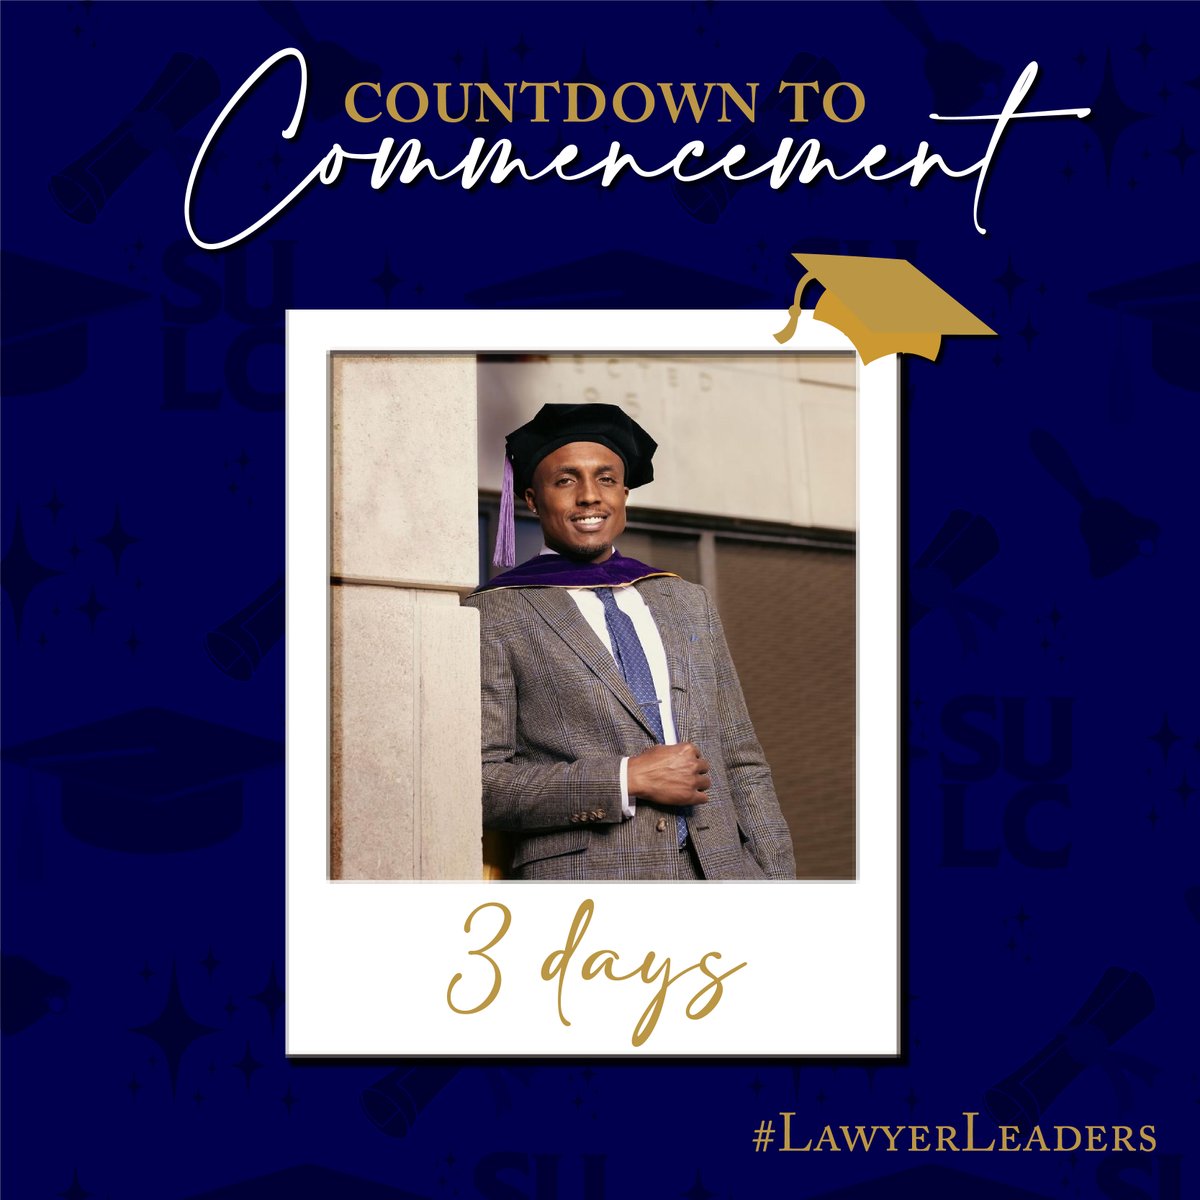 You’re almost there! Only 3 days left until graduation and we are so excited to celebrate our #LawyerLeaders on their special day! #SULC #SpringCommencement